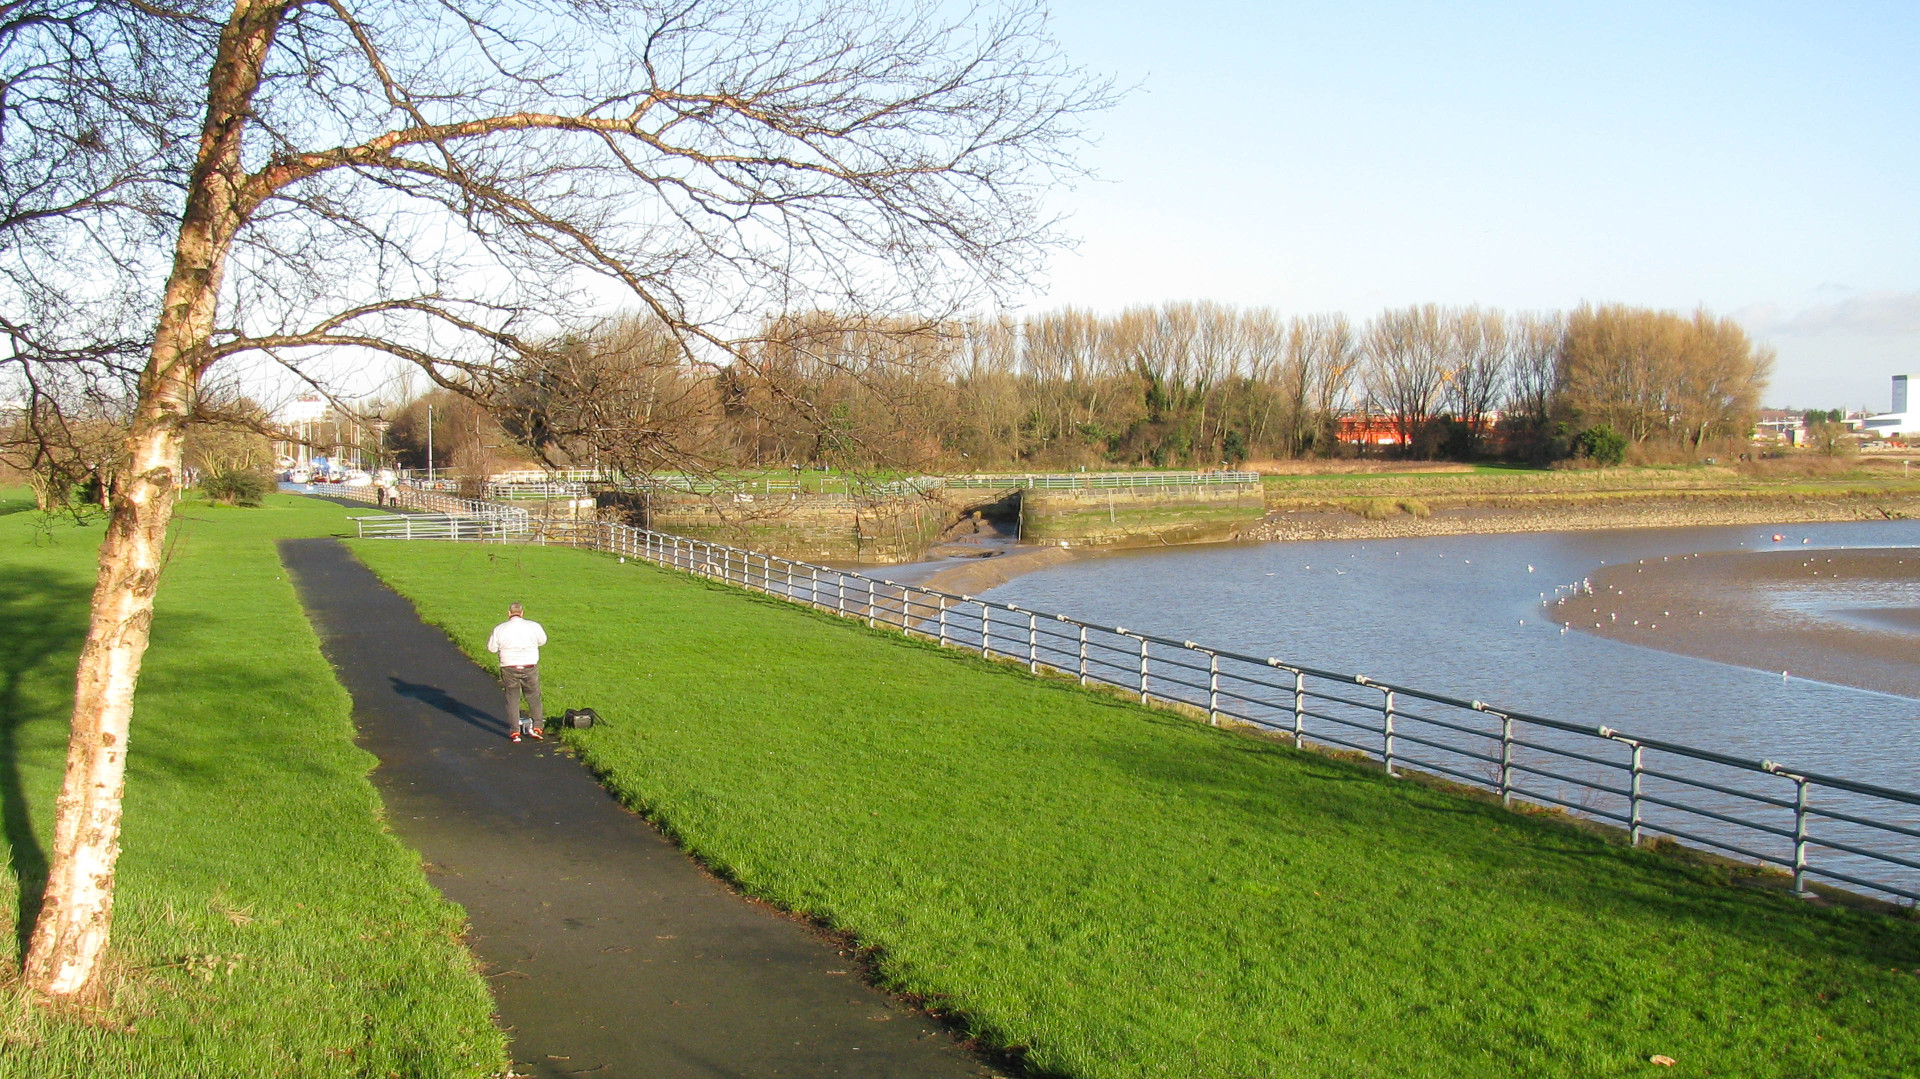 The entrance to the St Helens Canal from the River Mersey